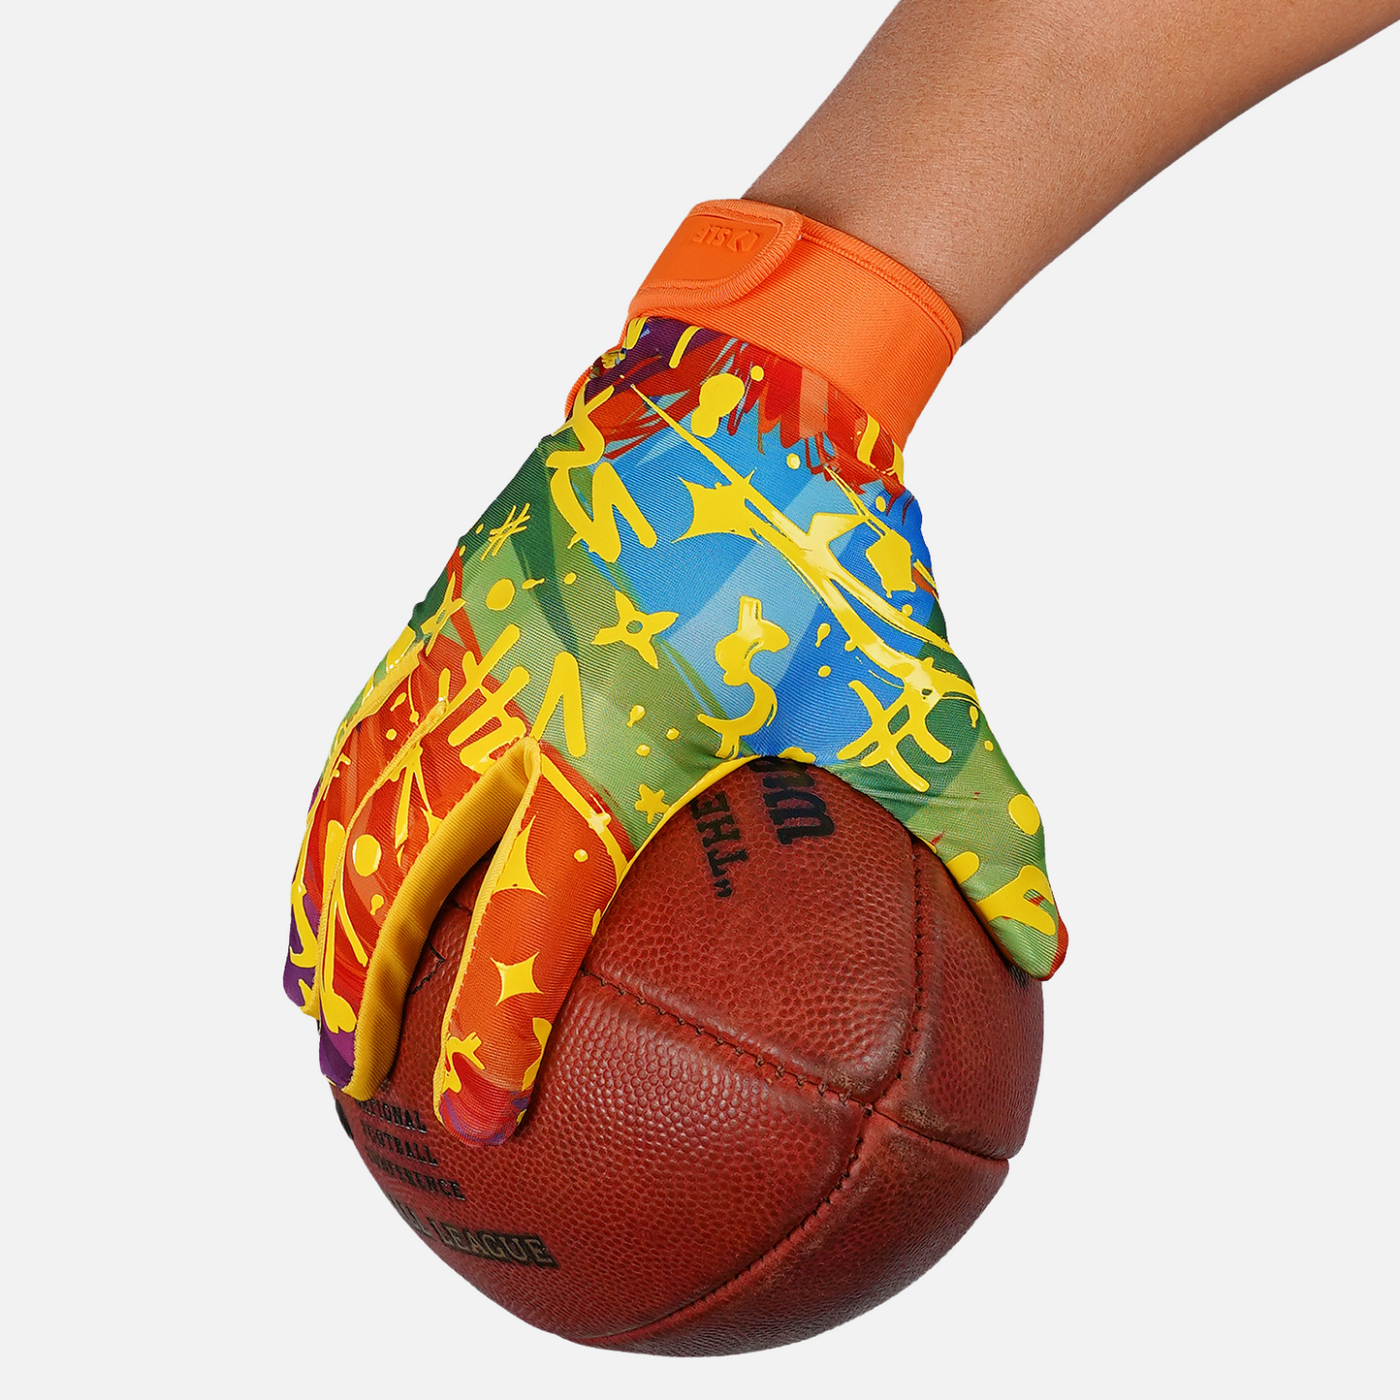 SLF Milan Colorful Sticky Football Receiver Gloves